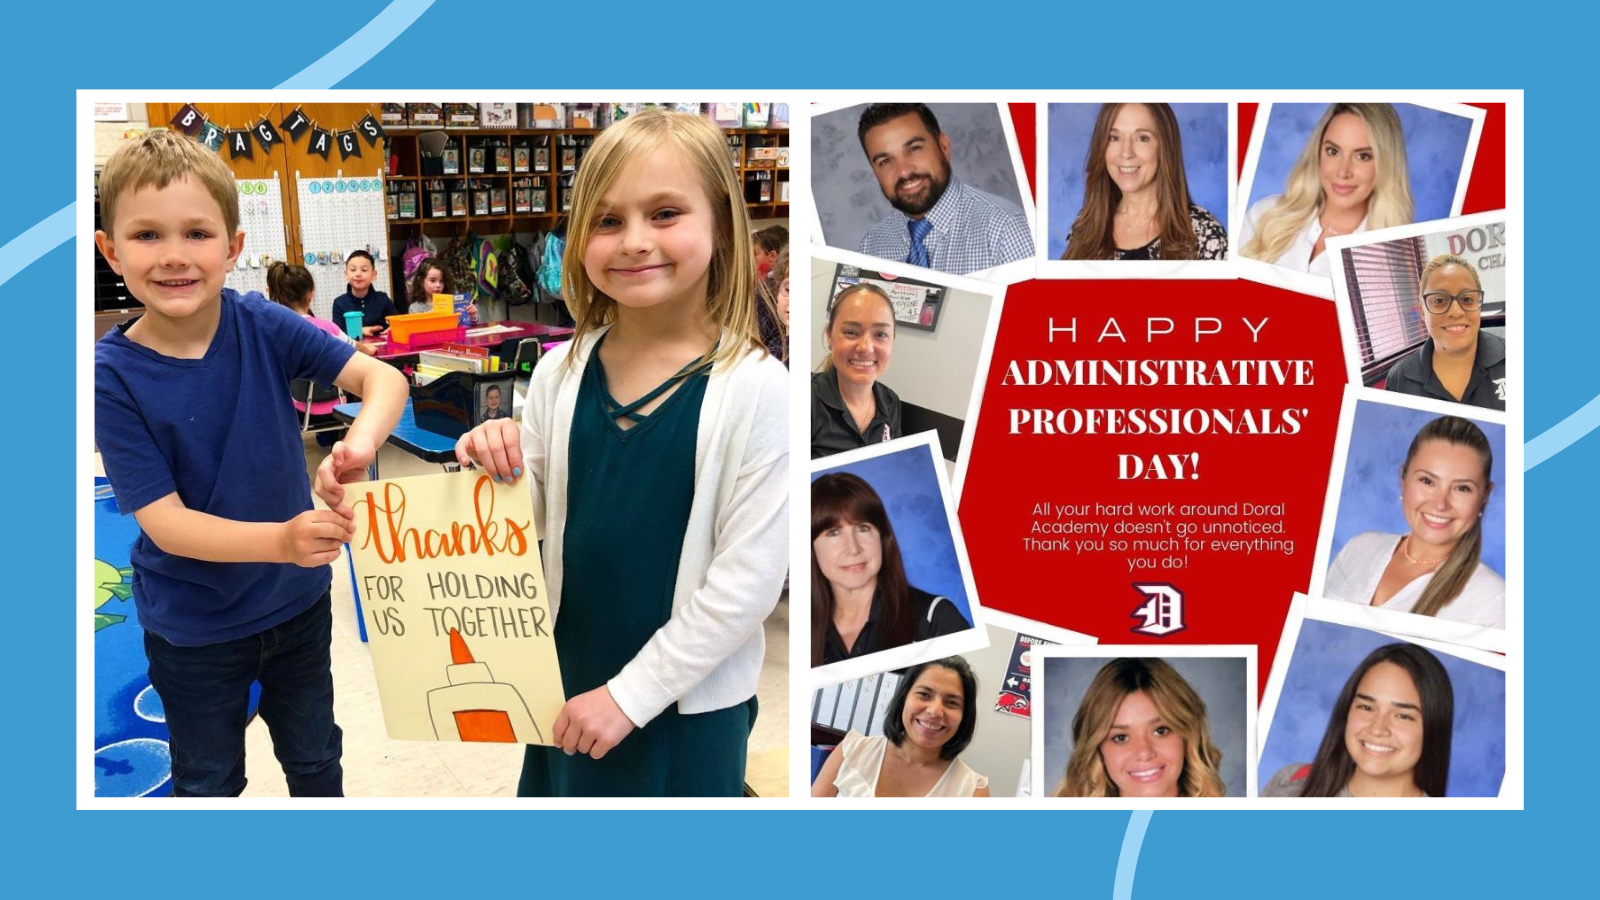 Collage of Administrative Professionals Day celebrations